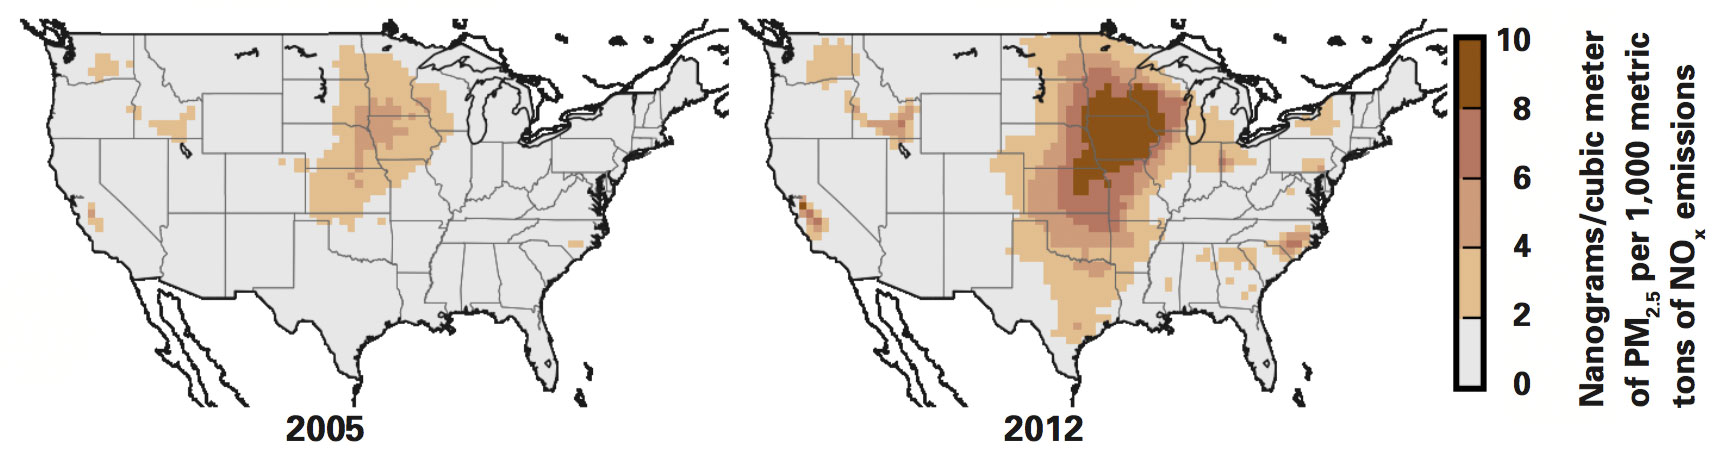 These maps show sensitivities of PM2.5 concentrations to emissions of NOx at locations across the United States in winter of 2005 (left) and 2012. The darker the color, the greater the concentration of PM2.5 formed for every 1,000 metric tons of emitted NOx. In general, sensitivities are higher in 2012 than in 2005. Therefore, reducing NOx emissions now would bring an even larger reduction in PM2.5 than it brought in the past.